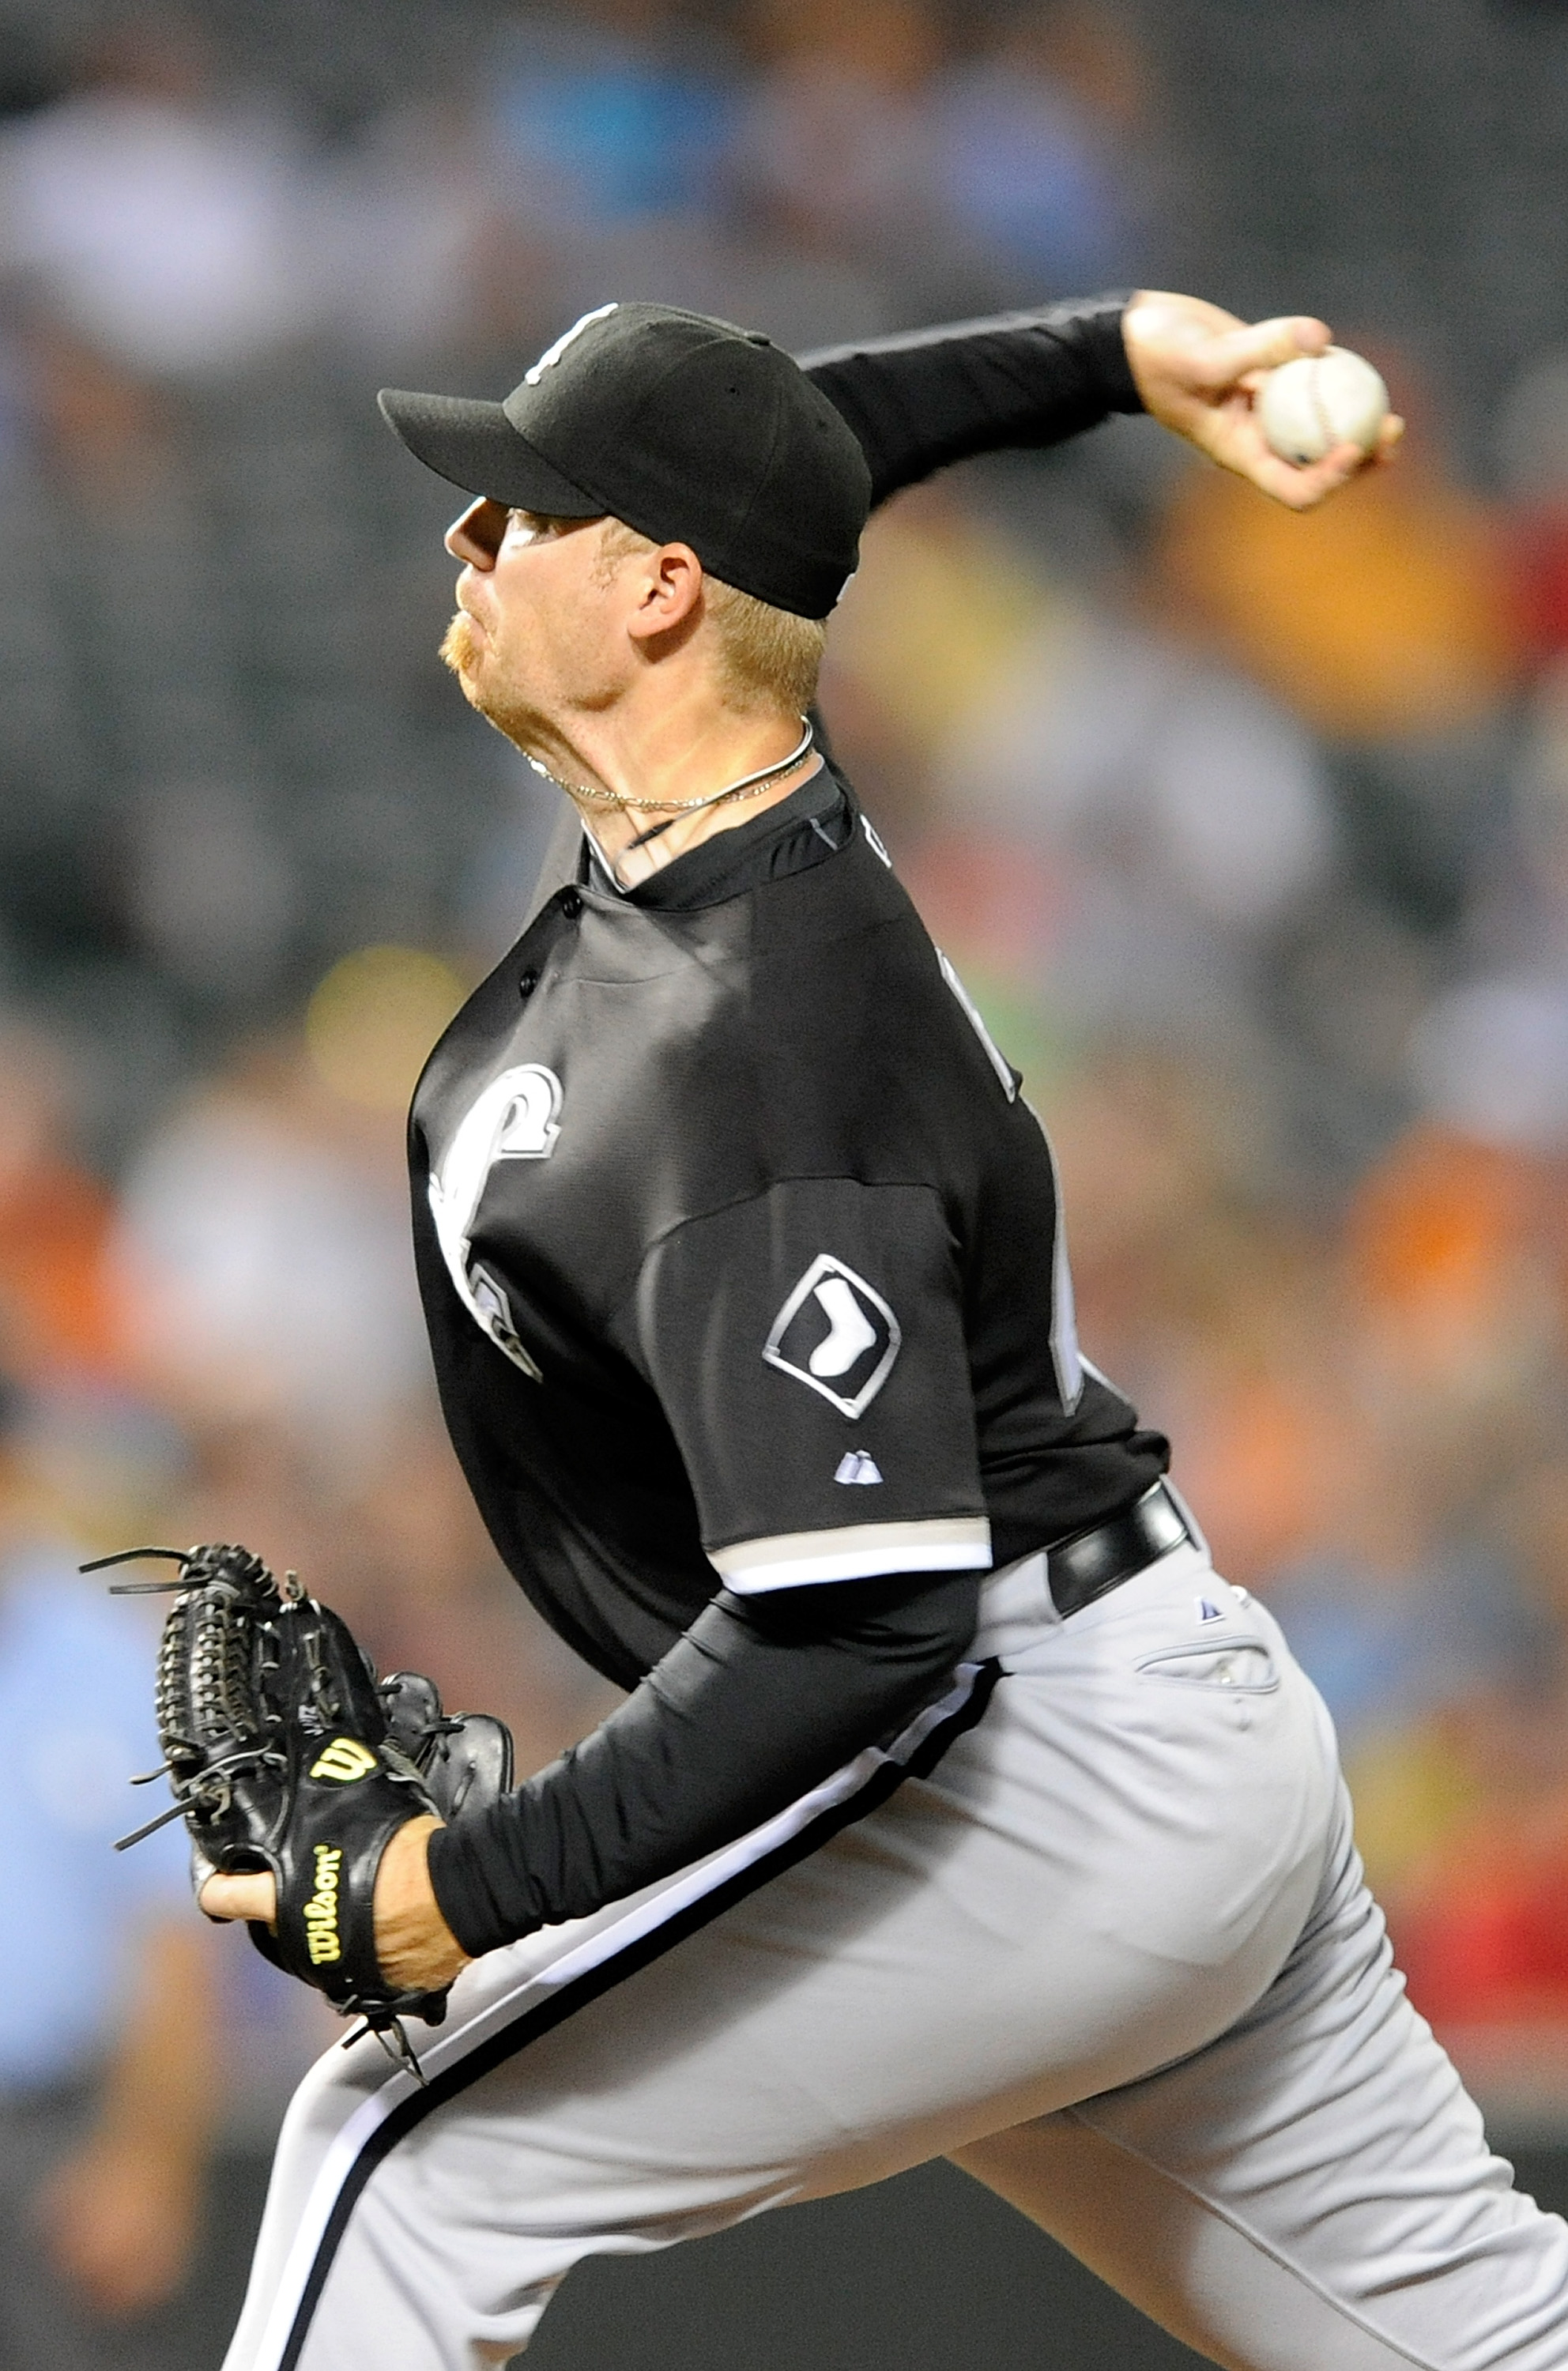 BALTIMORE - AUGUST 09:  J.J. Putz #40 of the Chicago White Sox pitches in the tenth inning against the Baltimore Orioles at Camden Yards on August 9, 2010 in Baltimore, Maryland.  (Photo by Greg Fiume/Getty Images)